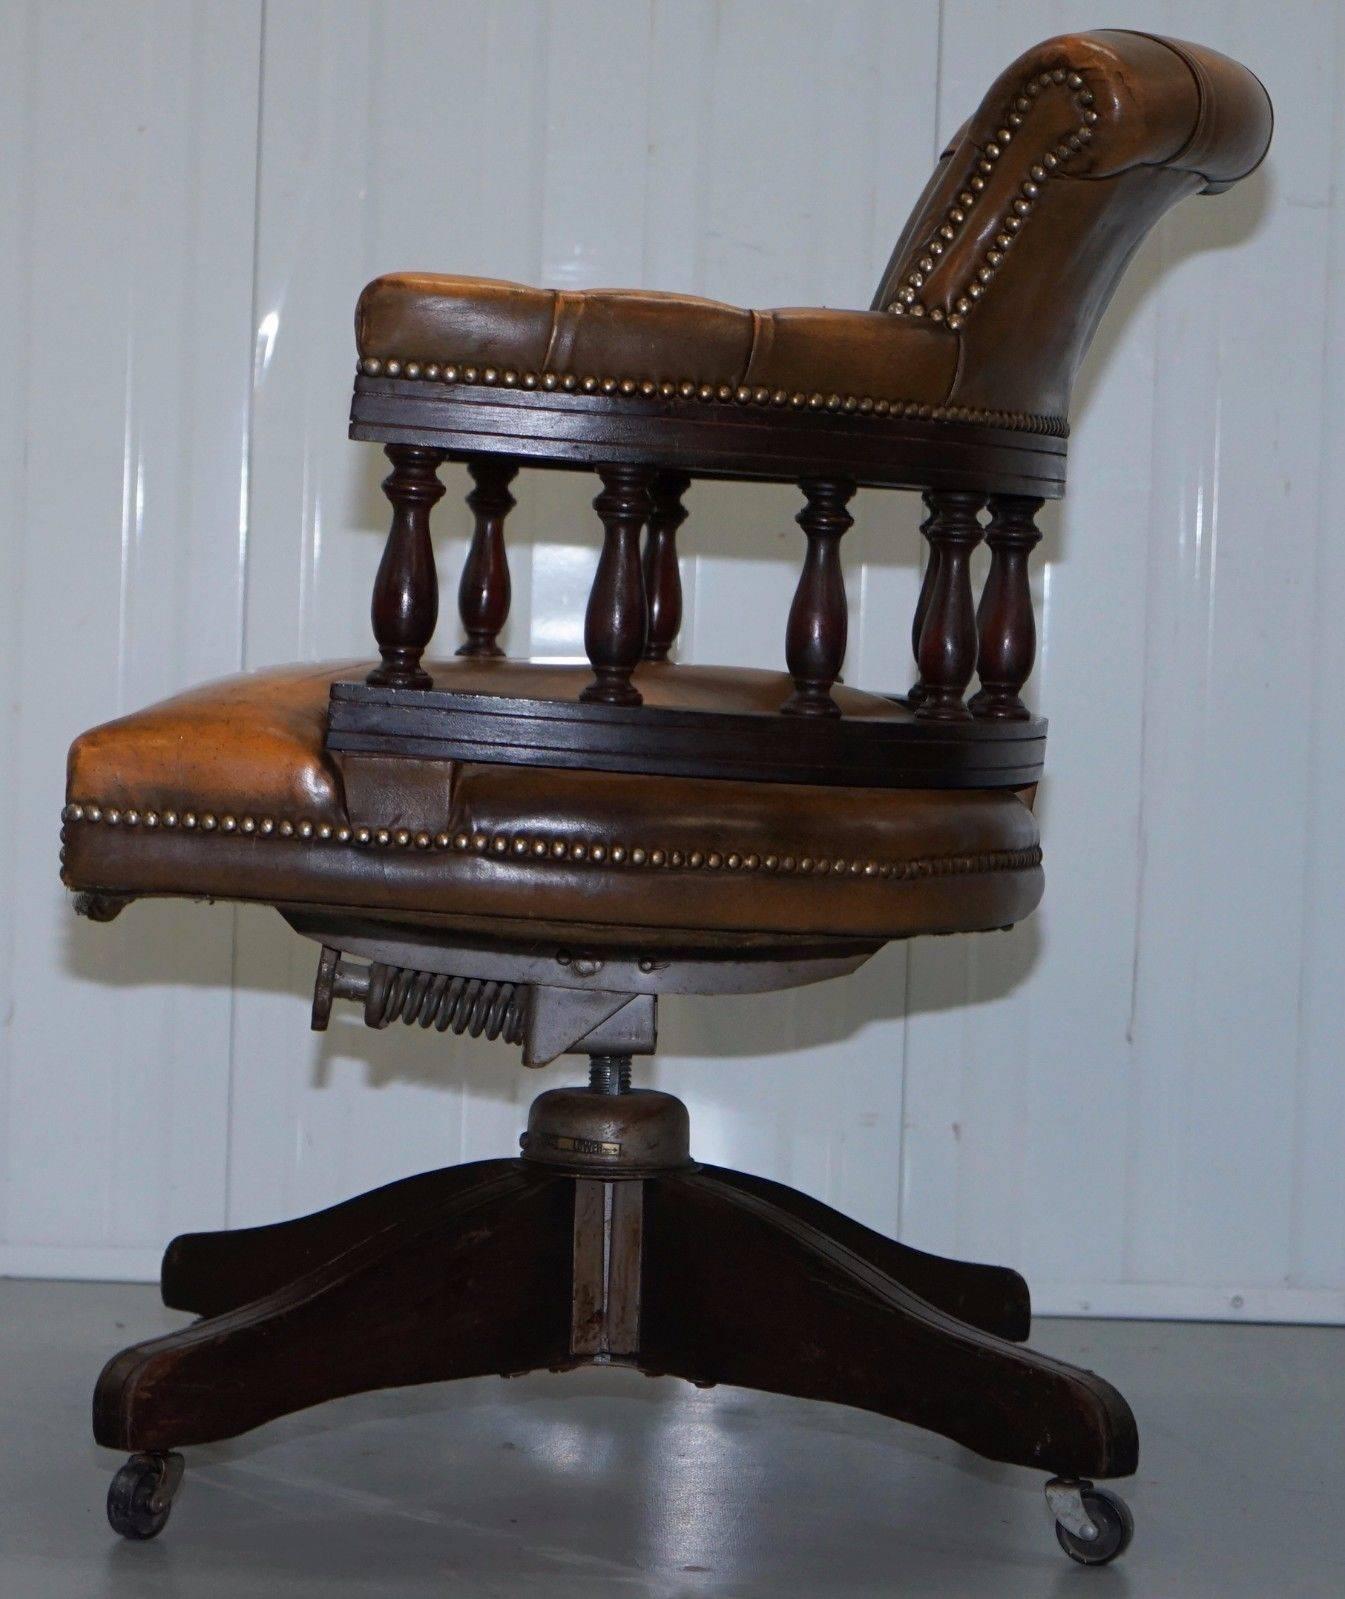 We are delighted to offer for sale this lovely 1950s original Chesterfield aged tan brown leather captain’s chair

The chair was made by the original Chesterfield Company, circa 1950, back then they were using Hillcrest bases which are the finest